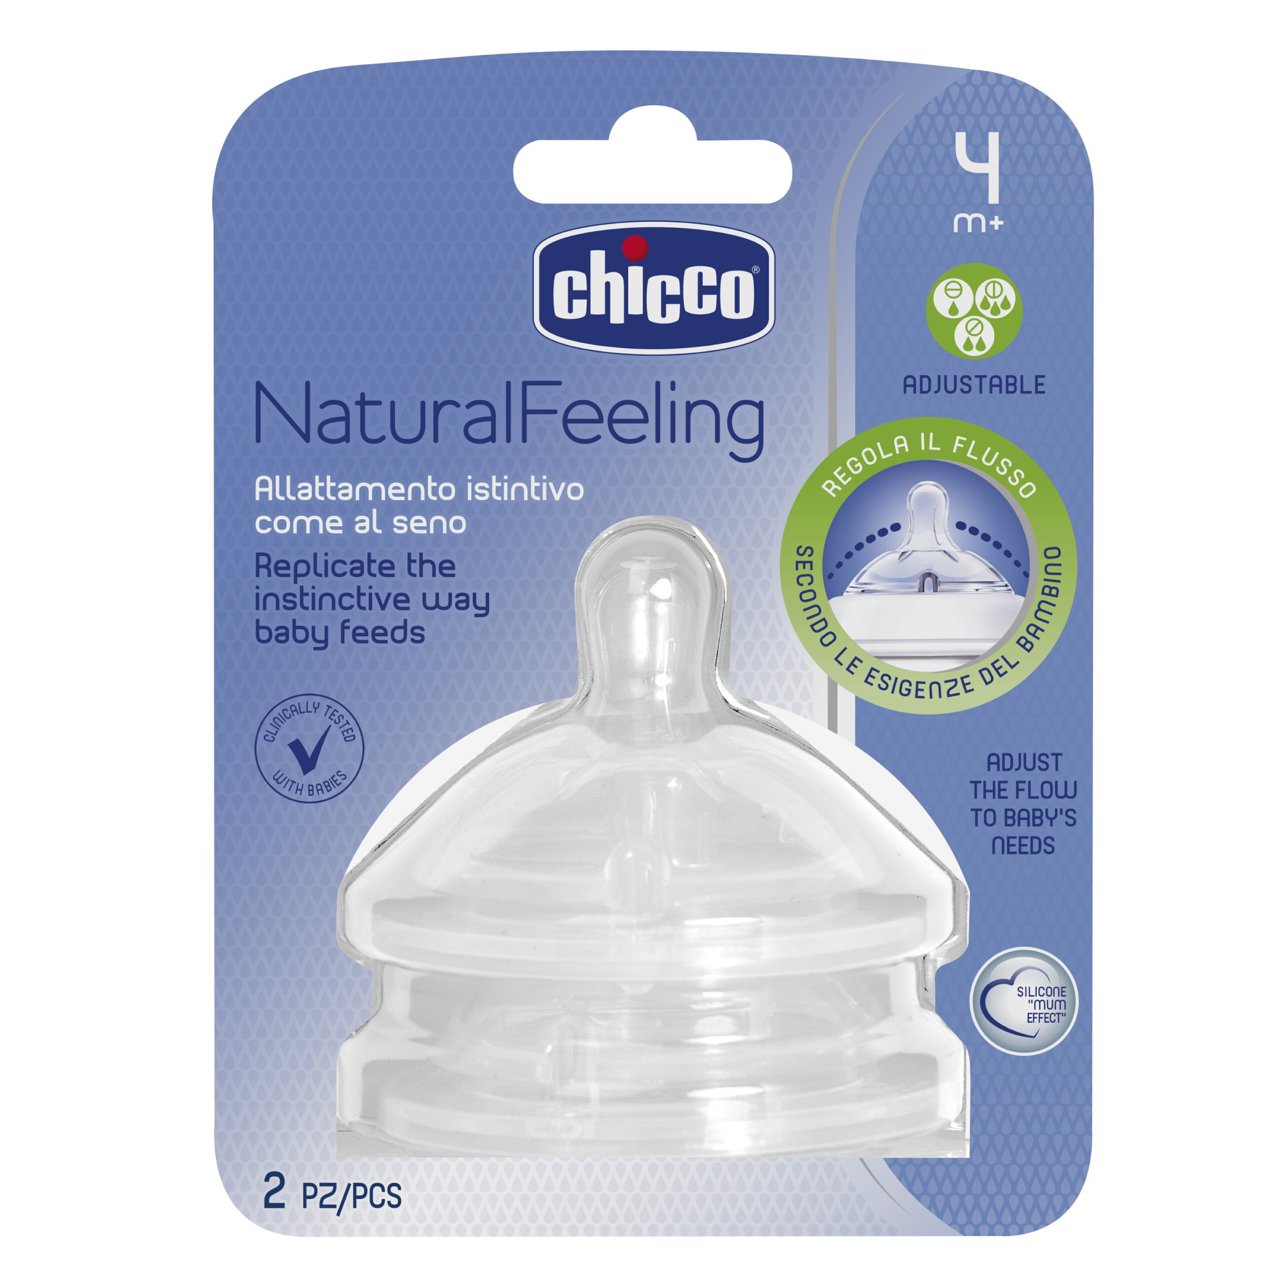 Chicco Natural Feeling Teat (4M+) Adjustable Flow 2 Pieces